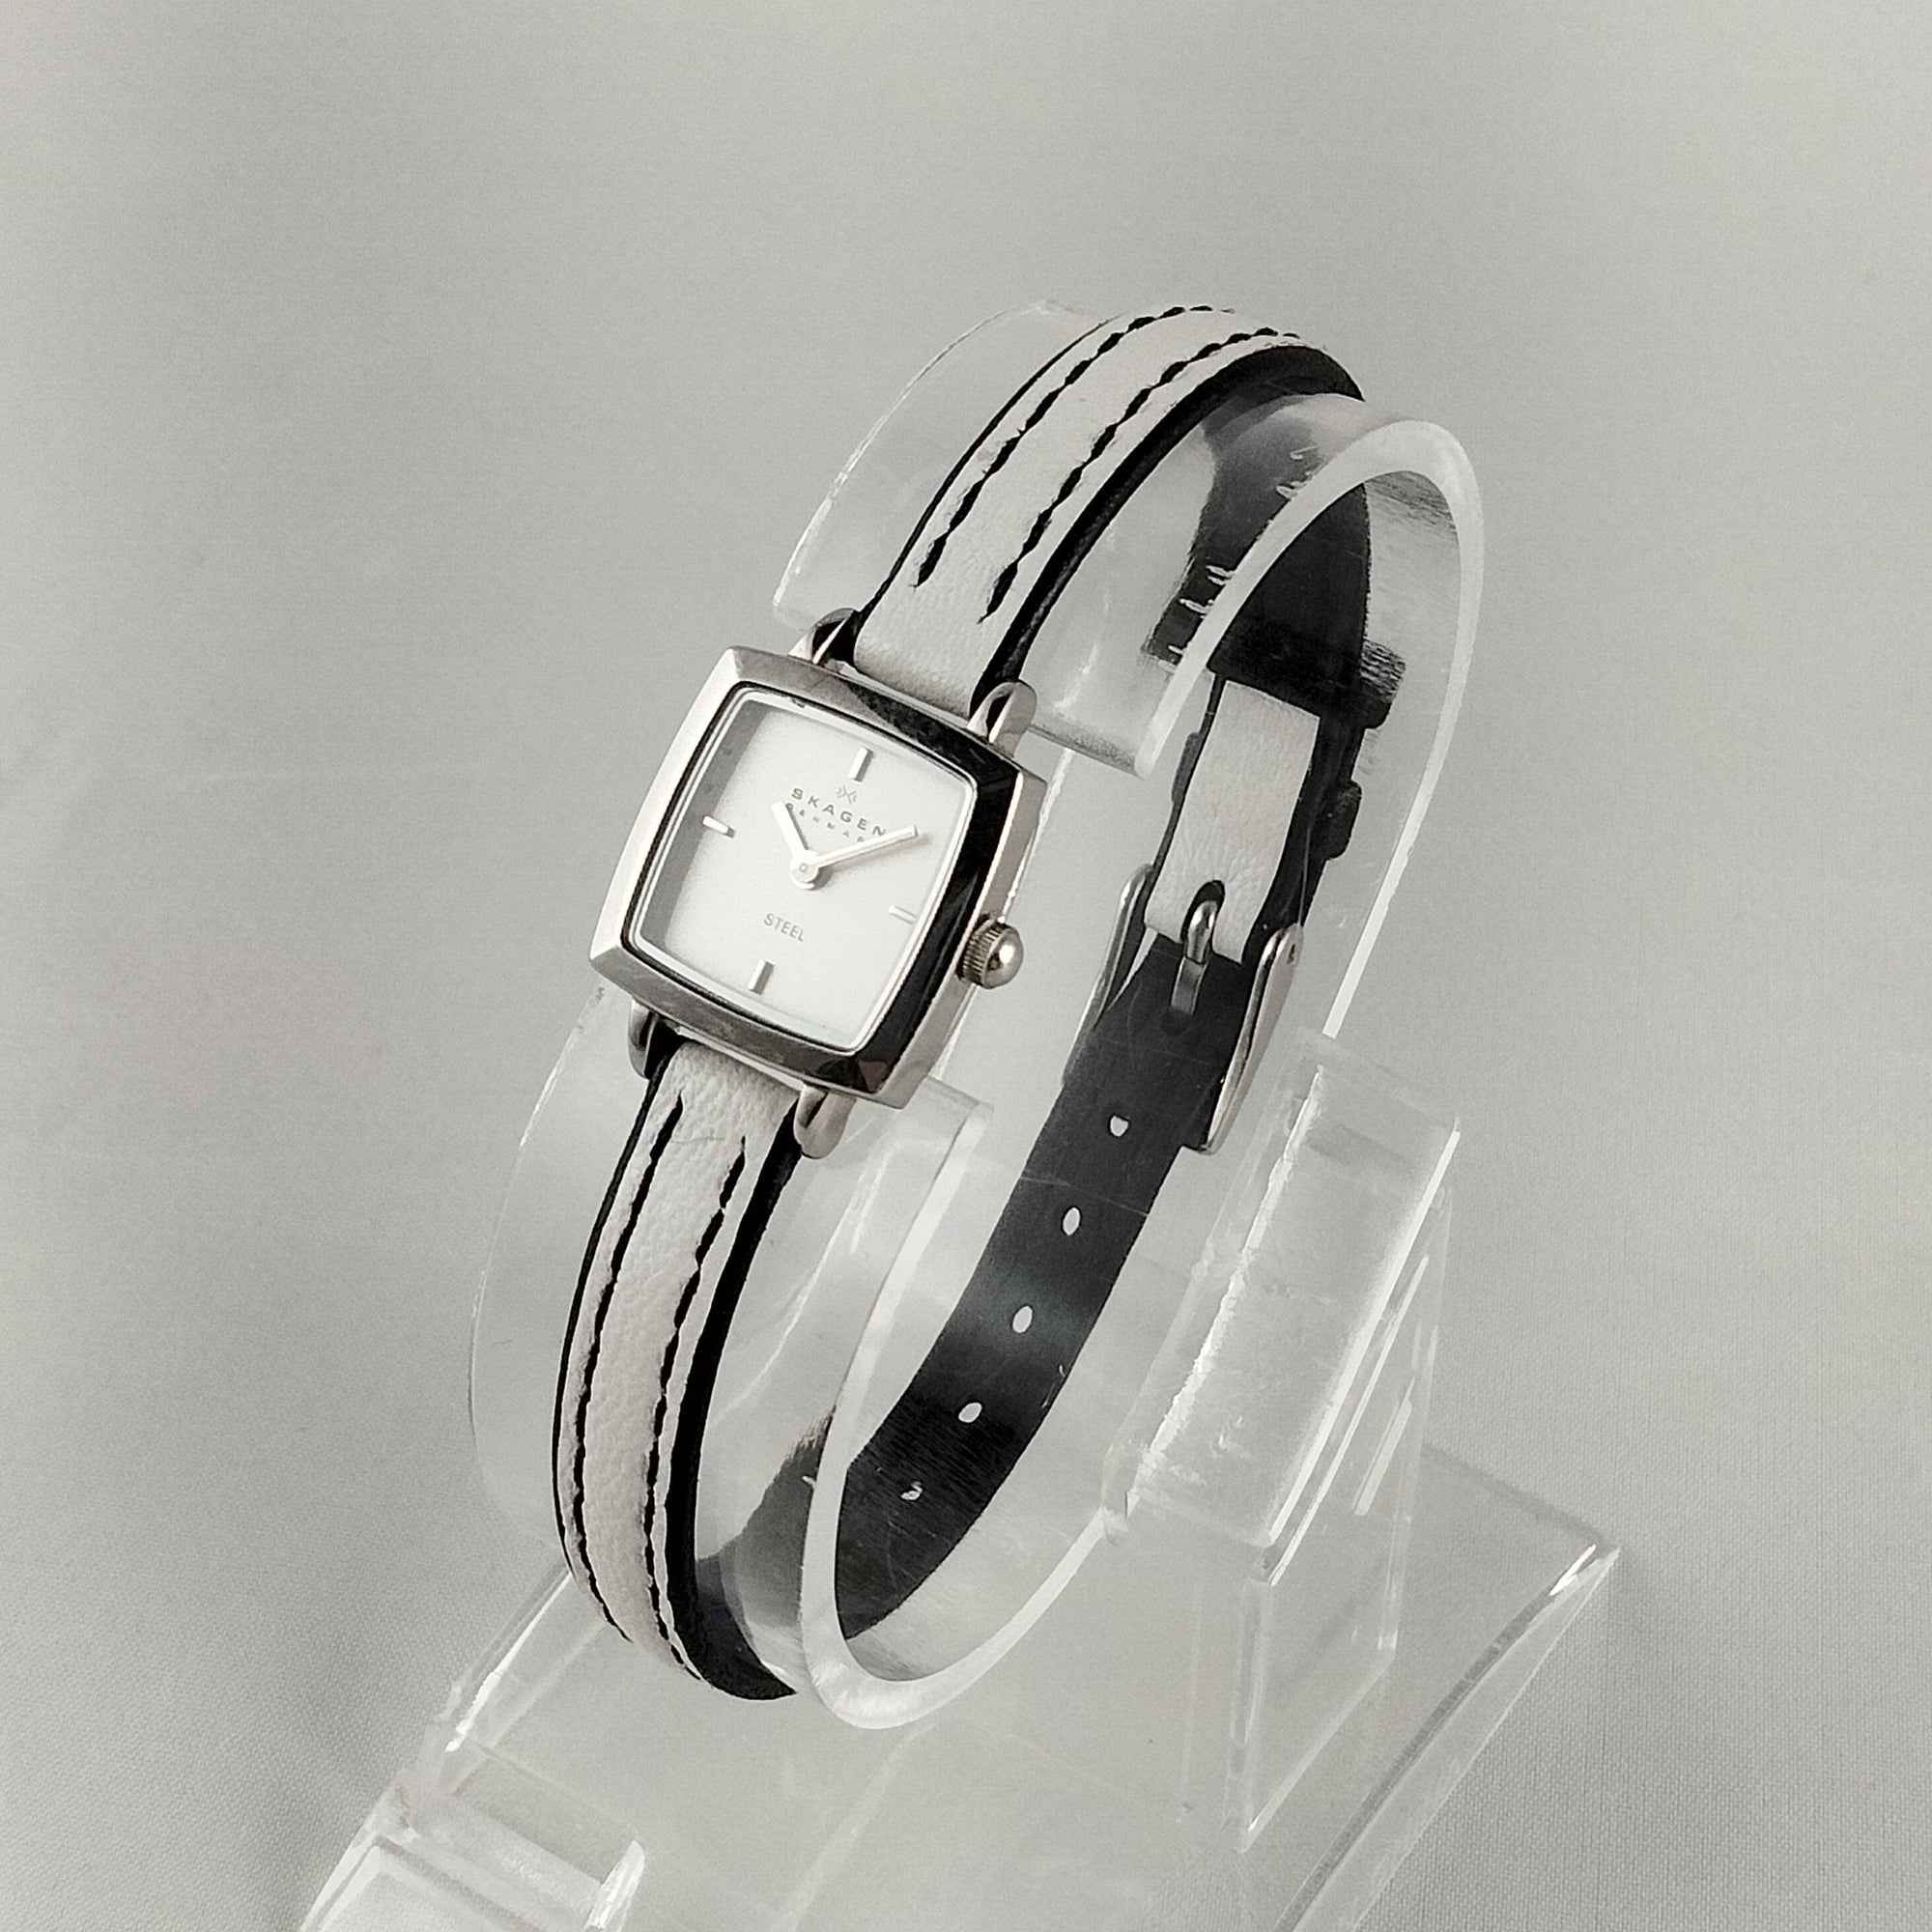 I Like Mikes Mid Century Modern Watches Skagen Women's Stainless Steel Watch, Tiny Square Face, Thin White Genuine Leather Strap